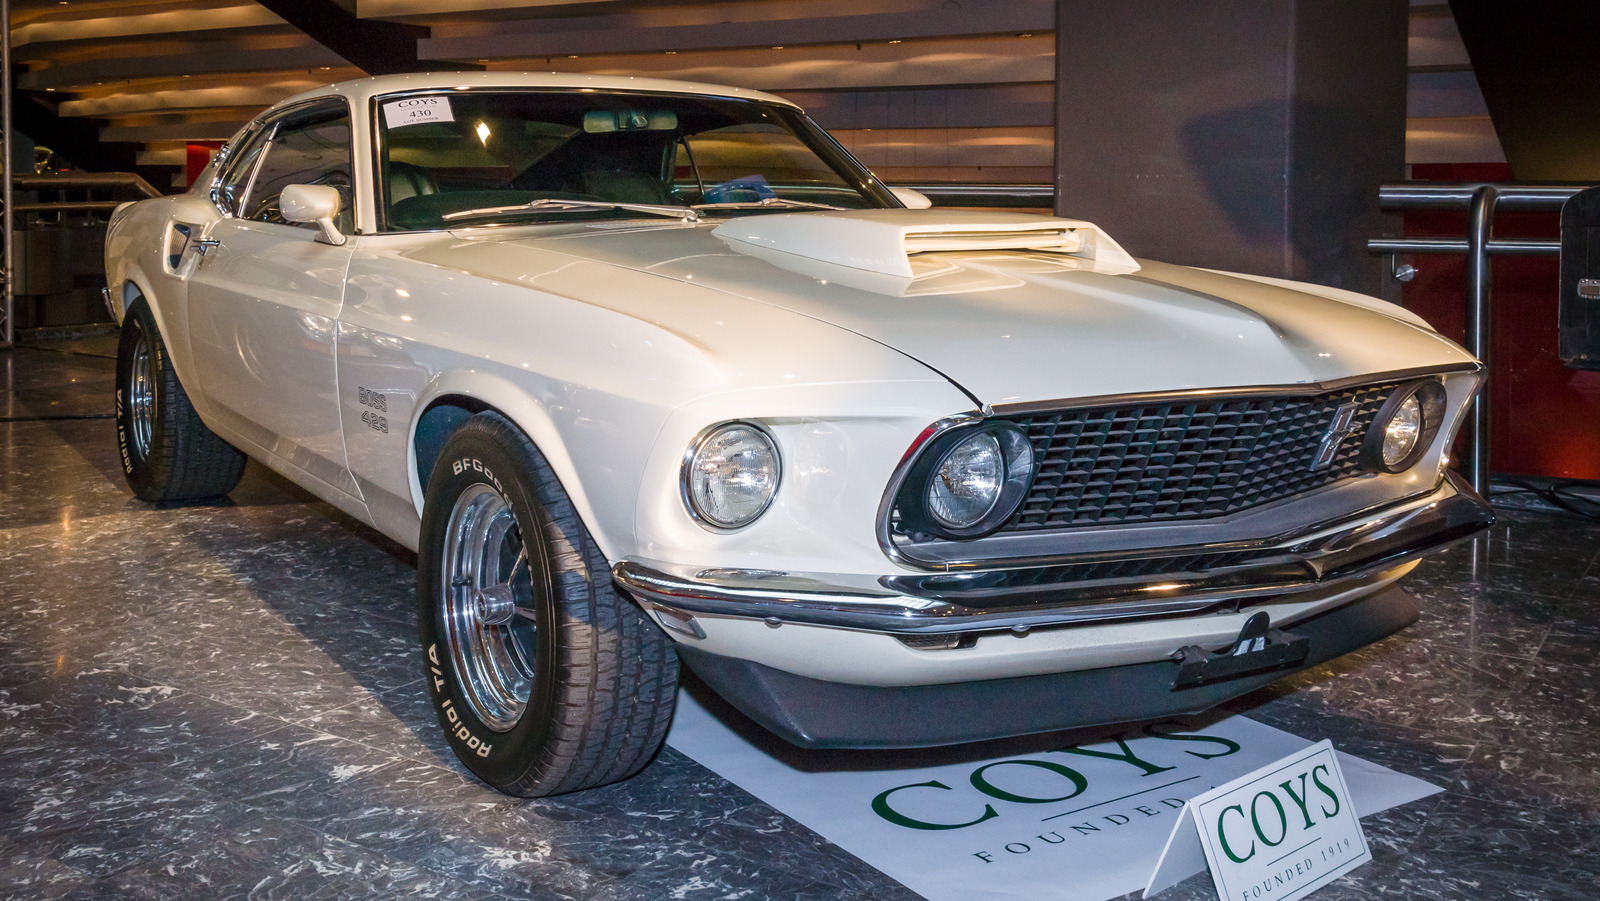 10 About The 1969 Mustang Boss 429